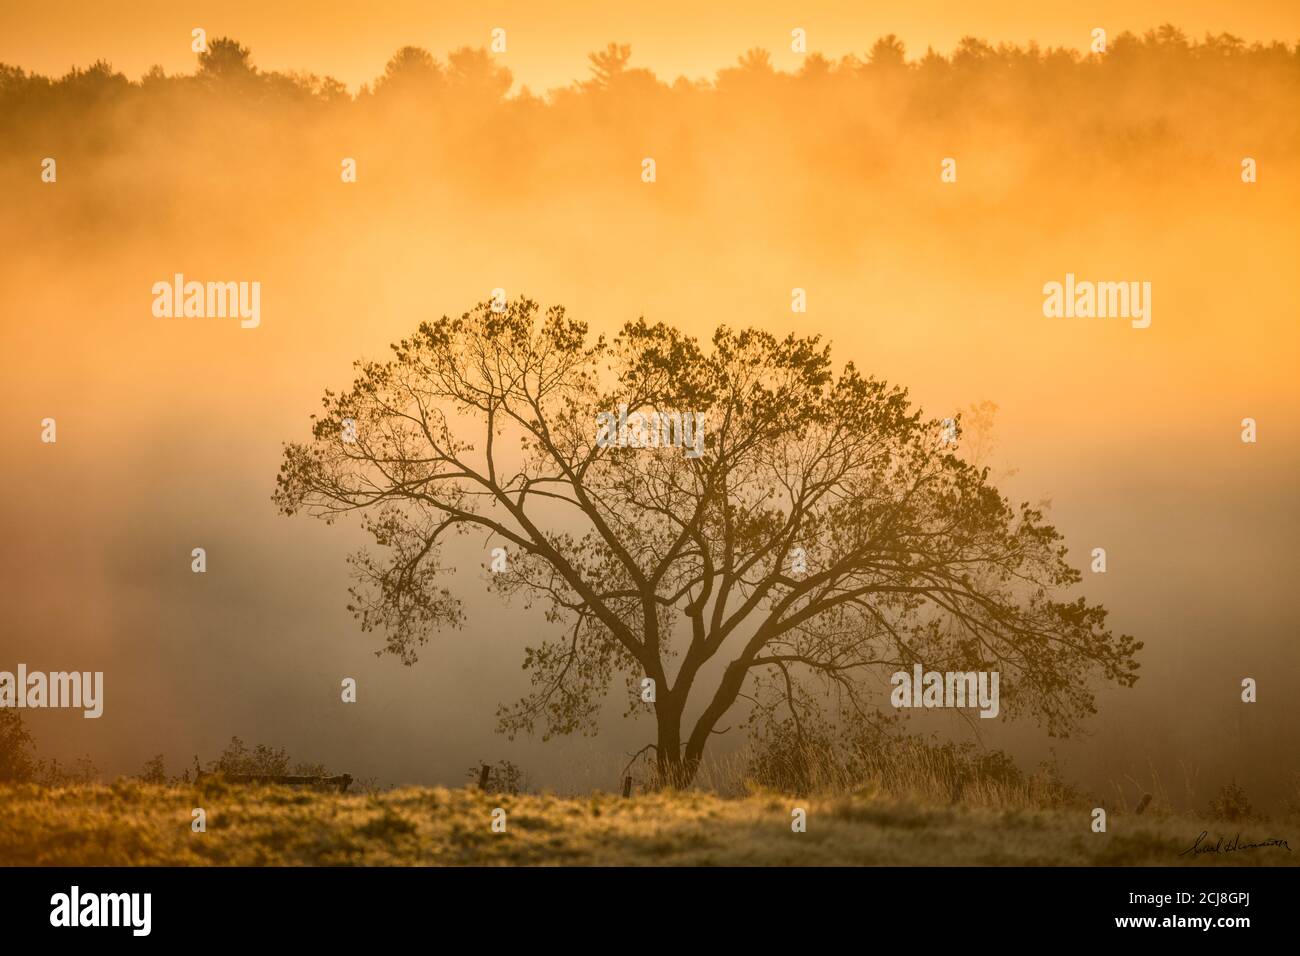 Majestic tree silhouetted against foggy sunrise, Wanup, Ontario, Canada. Stock Photo